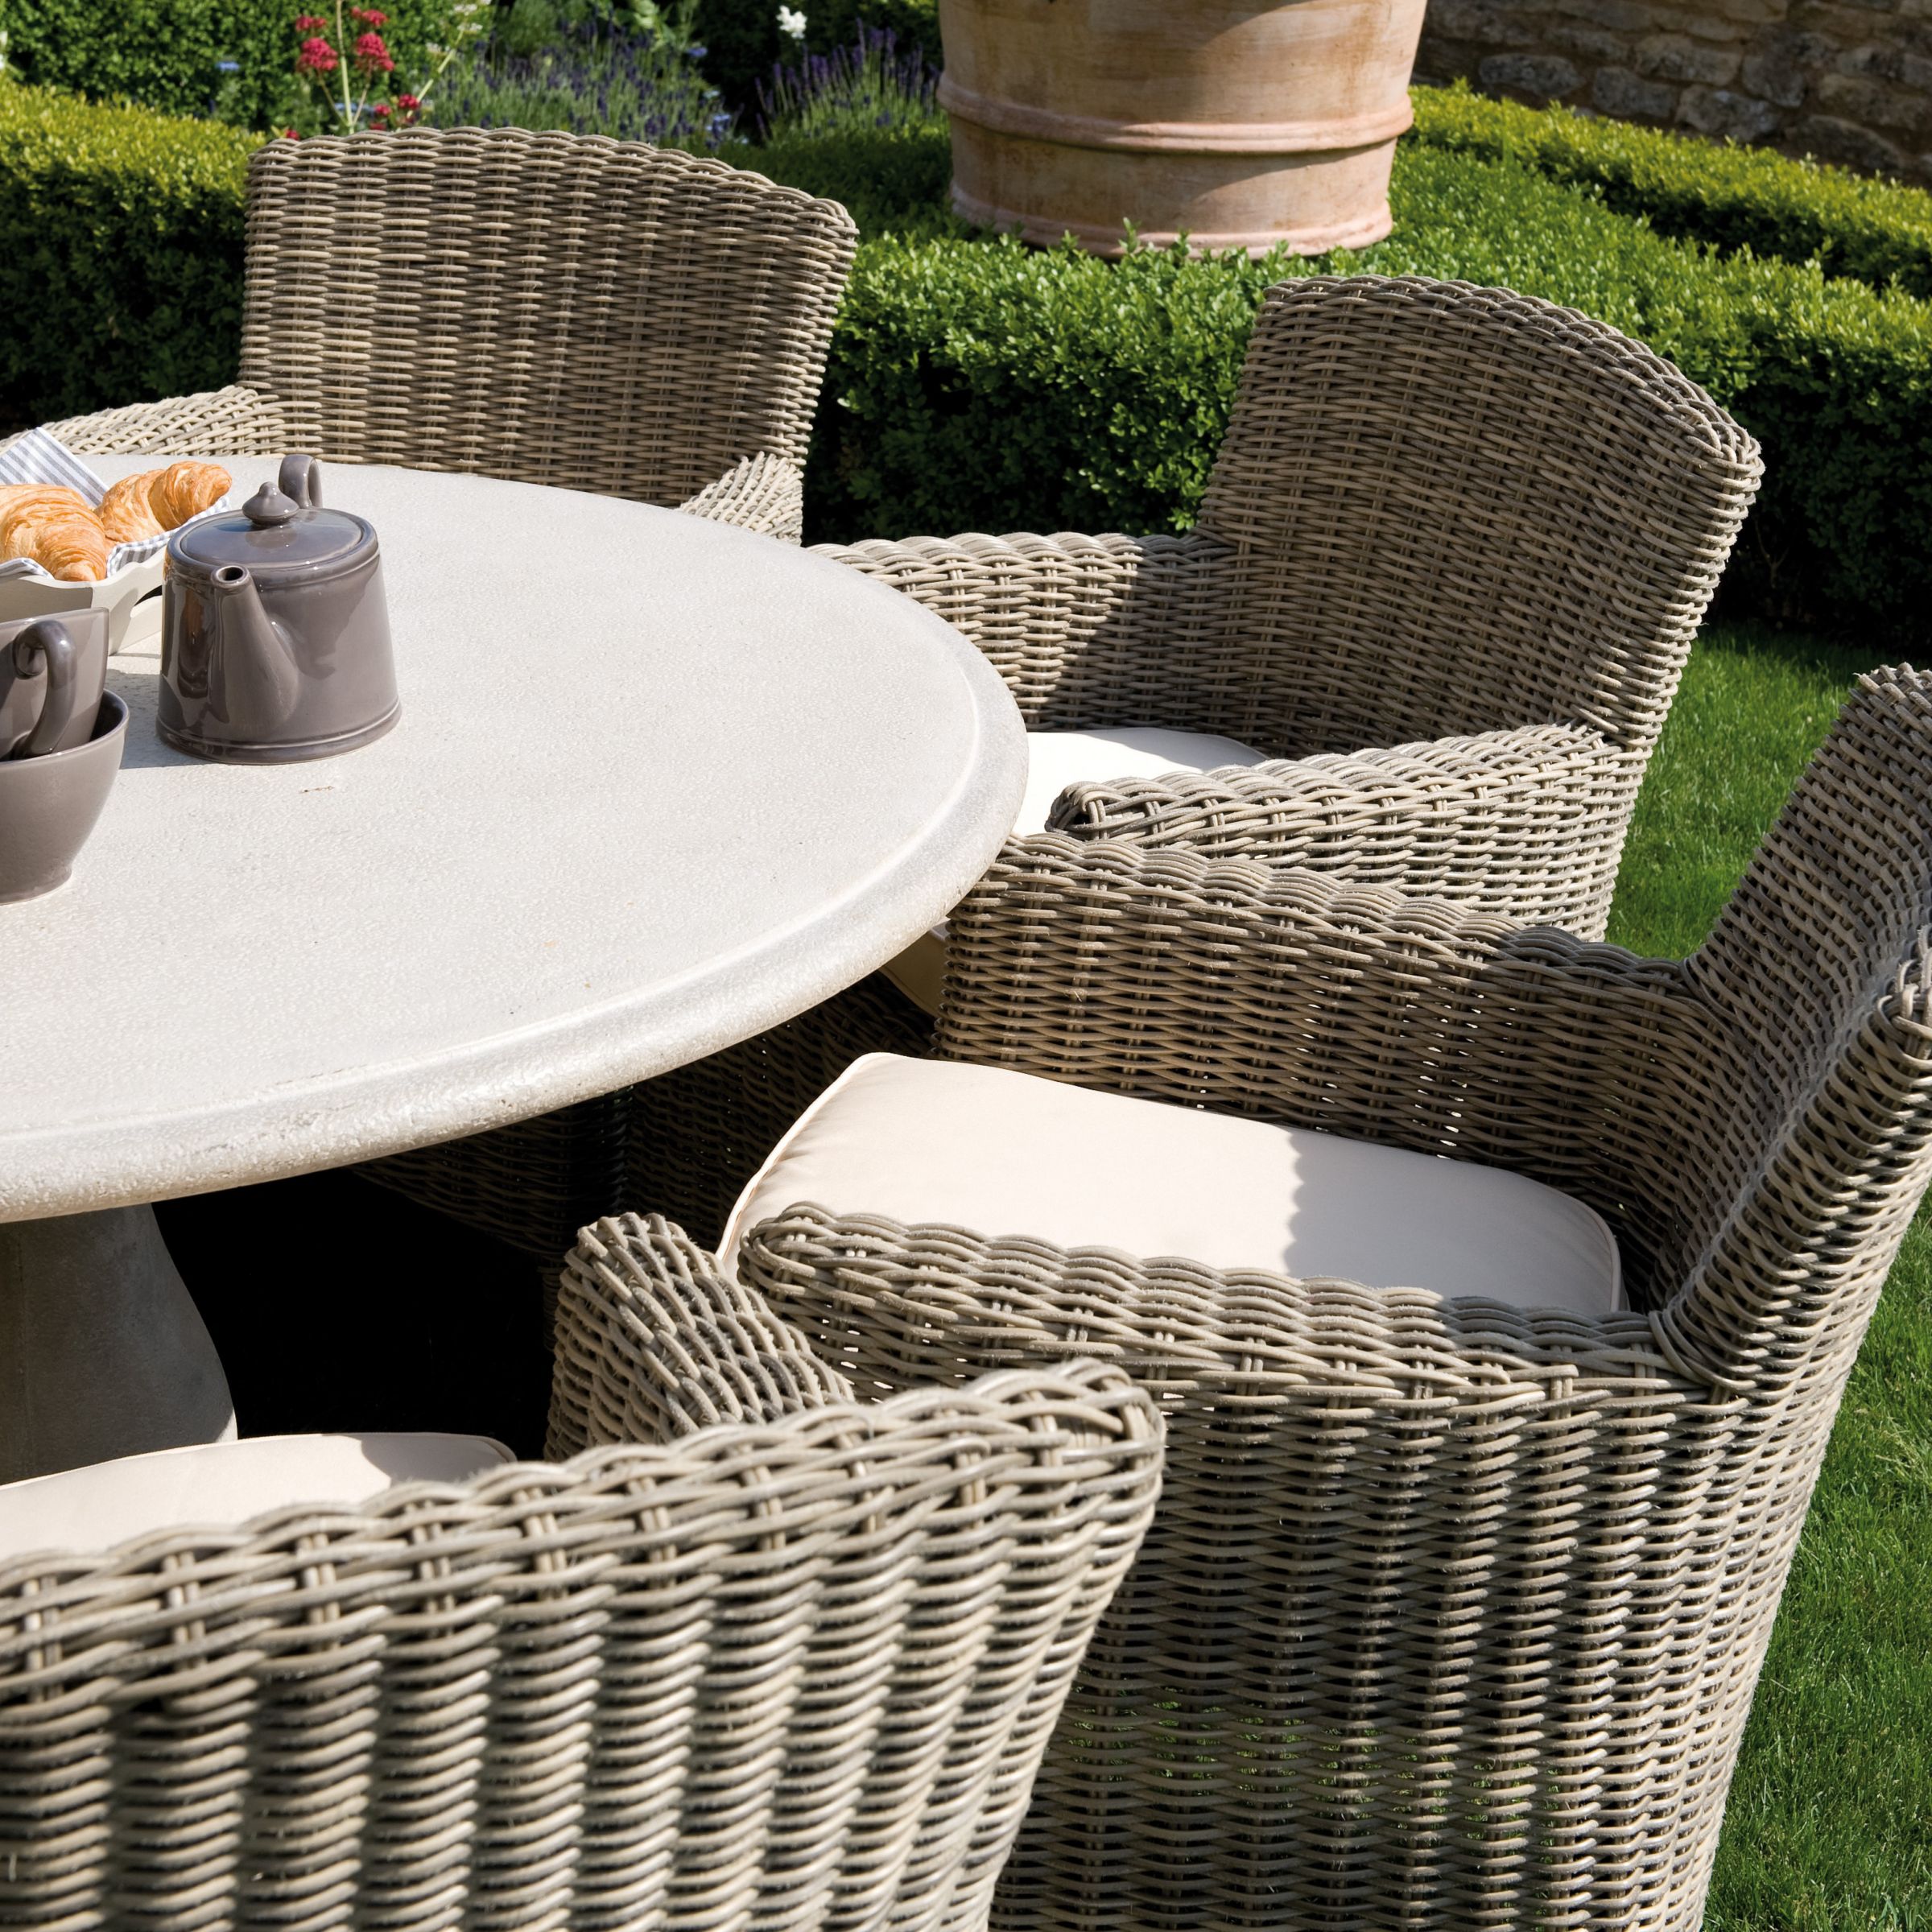 Neptune Portland Round 8 Seater Outdoor Dining Table, Synthetic Wicker, width 160cm